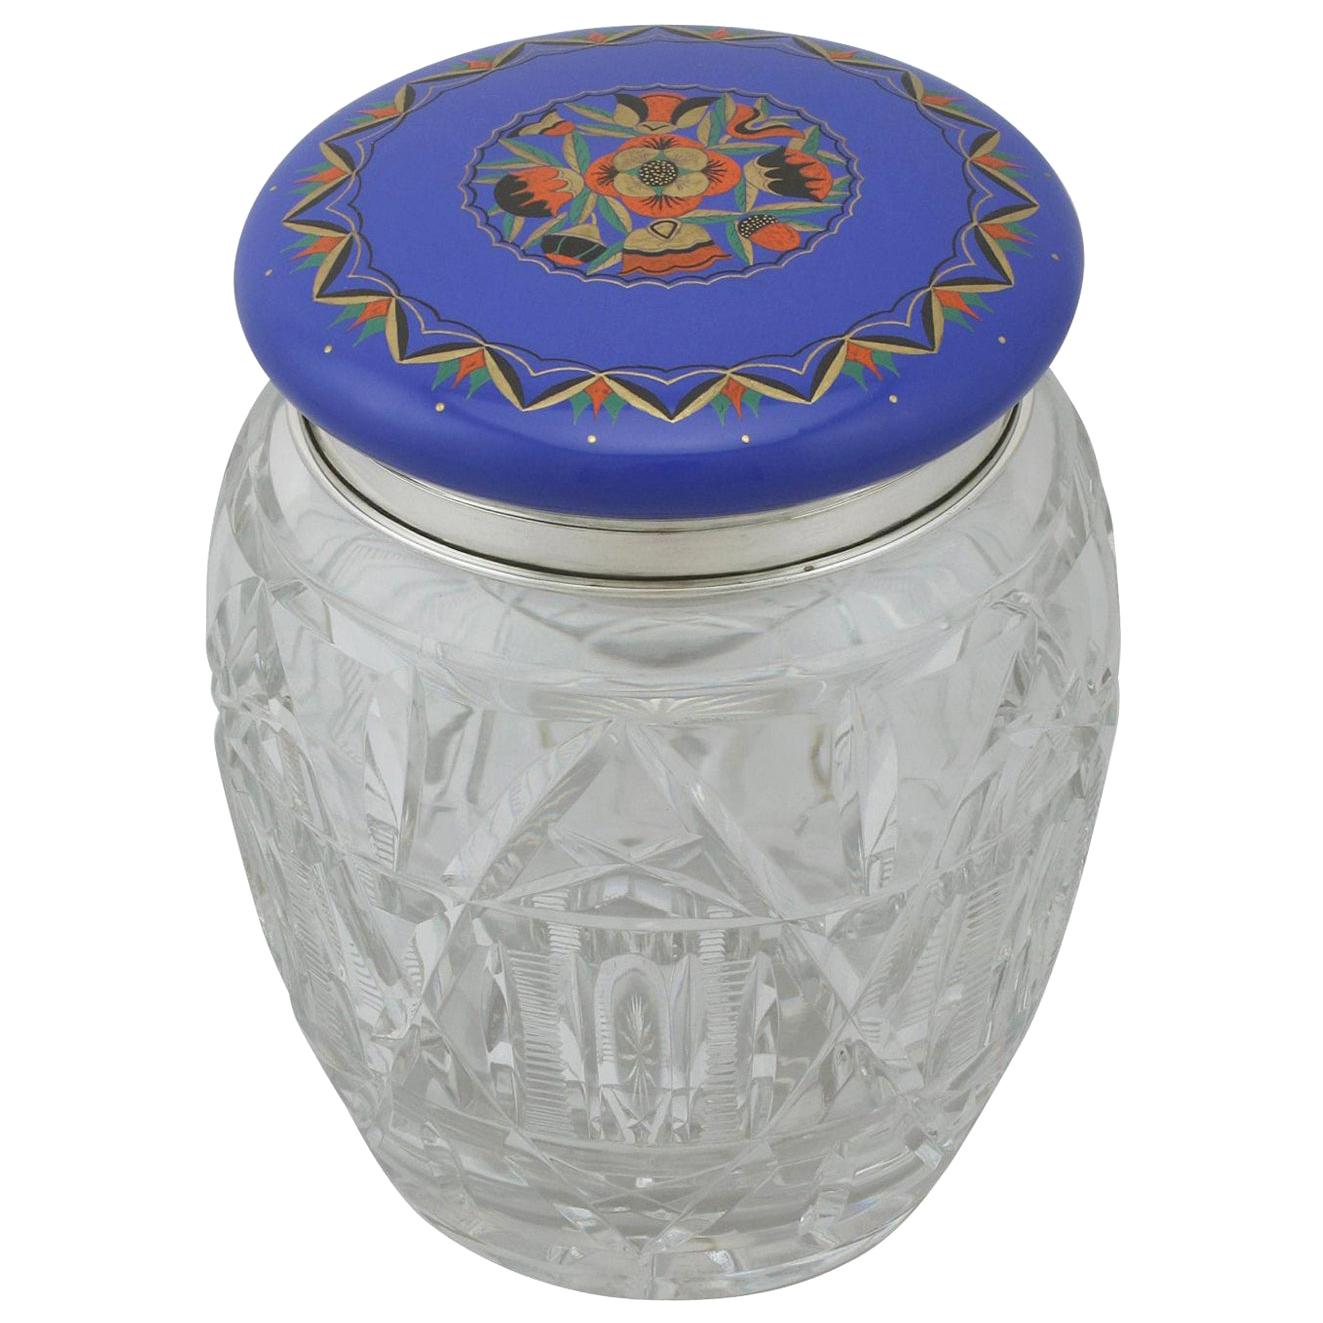 1920s Antique Sterling Silver and Cut-Glass and Enamel Biscuit Barrel